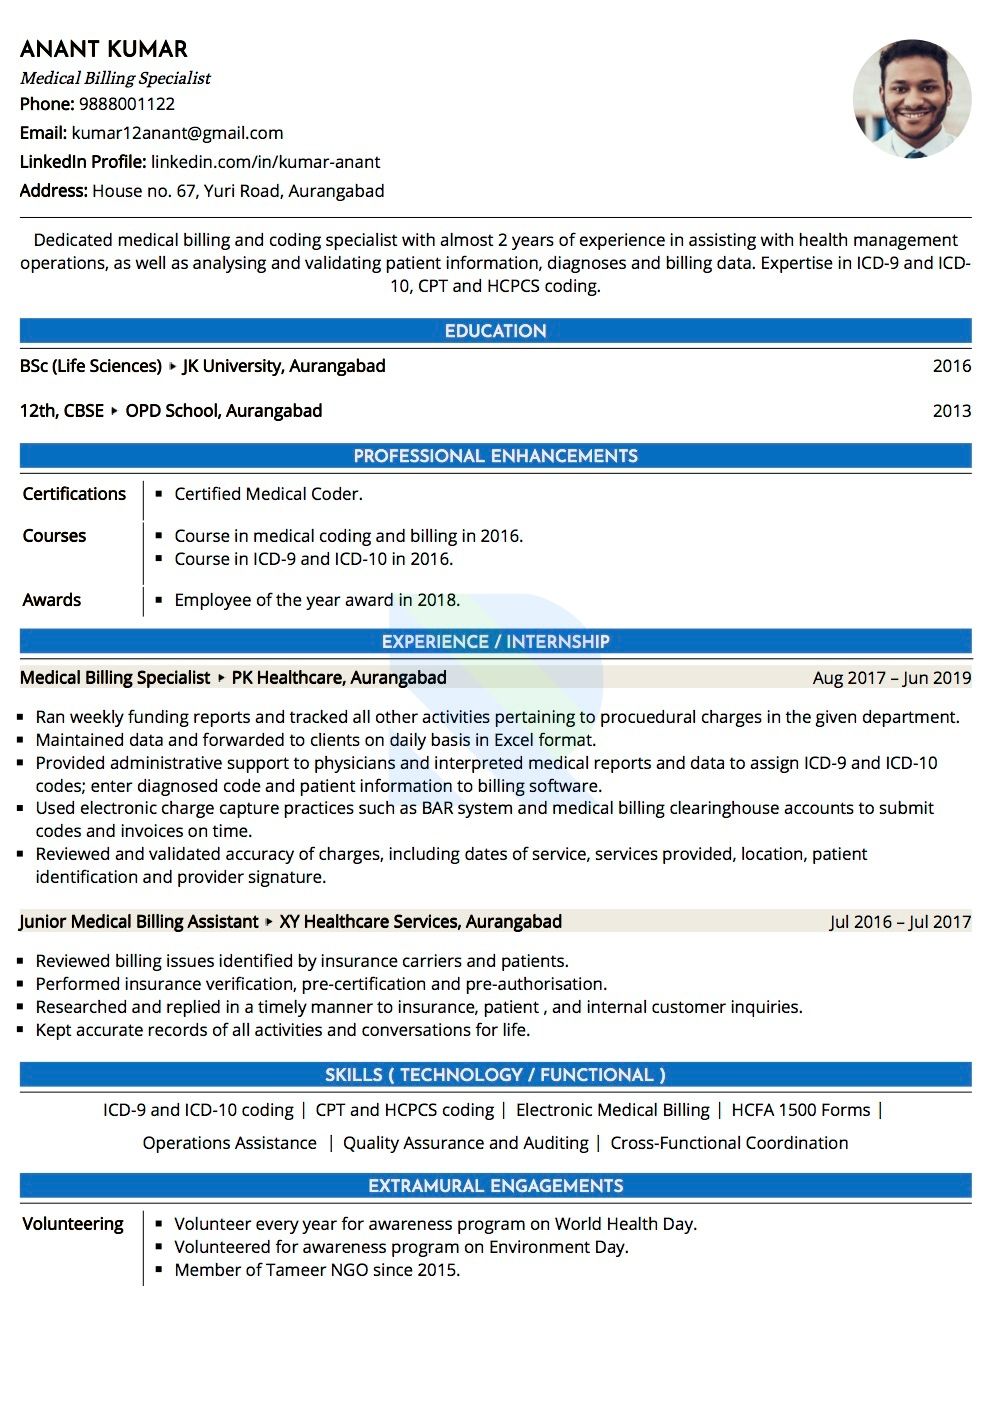 resume format experience details